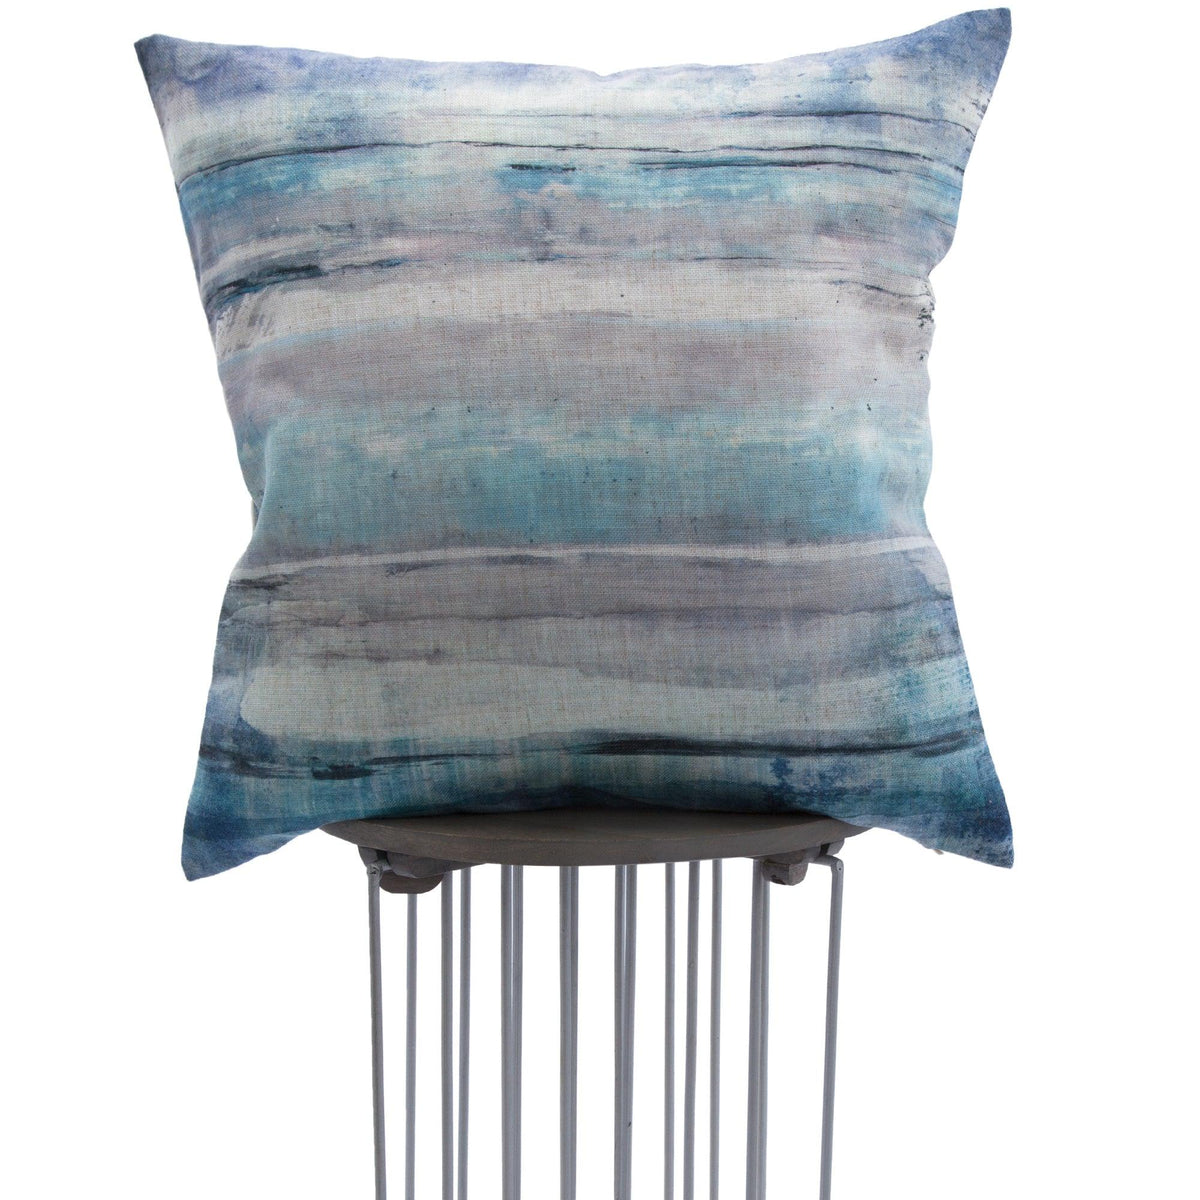 Montreal Lighting & Hardware - Pictor Pillow by Renwil - Montreal Lighting & Hardware